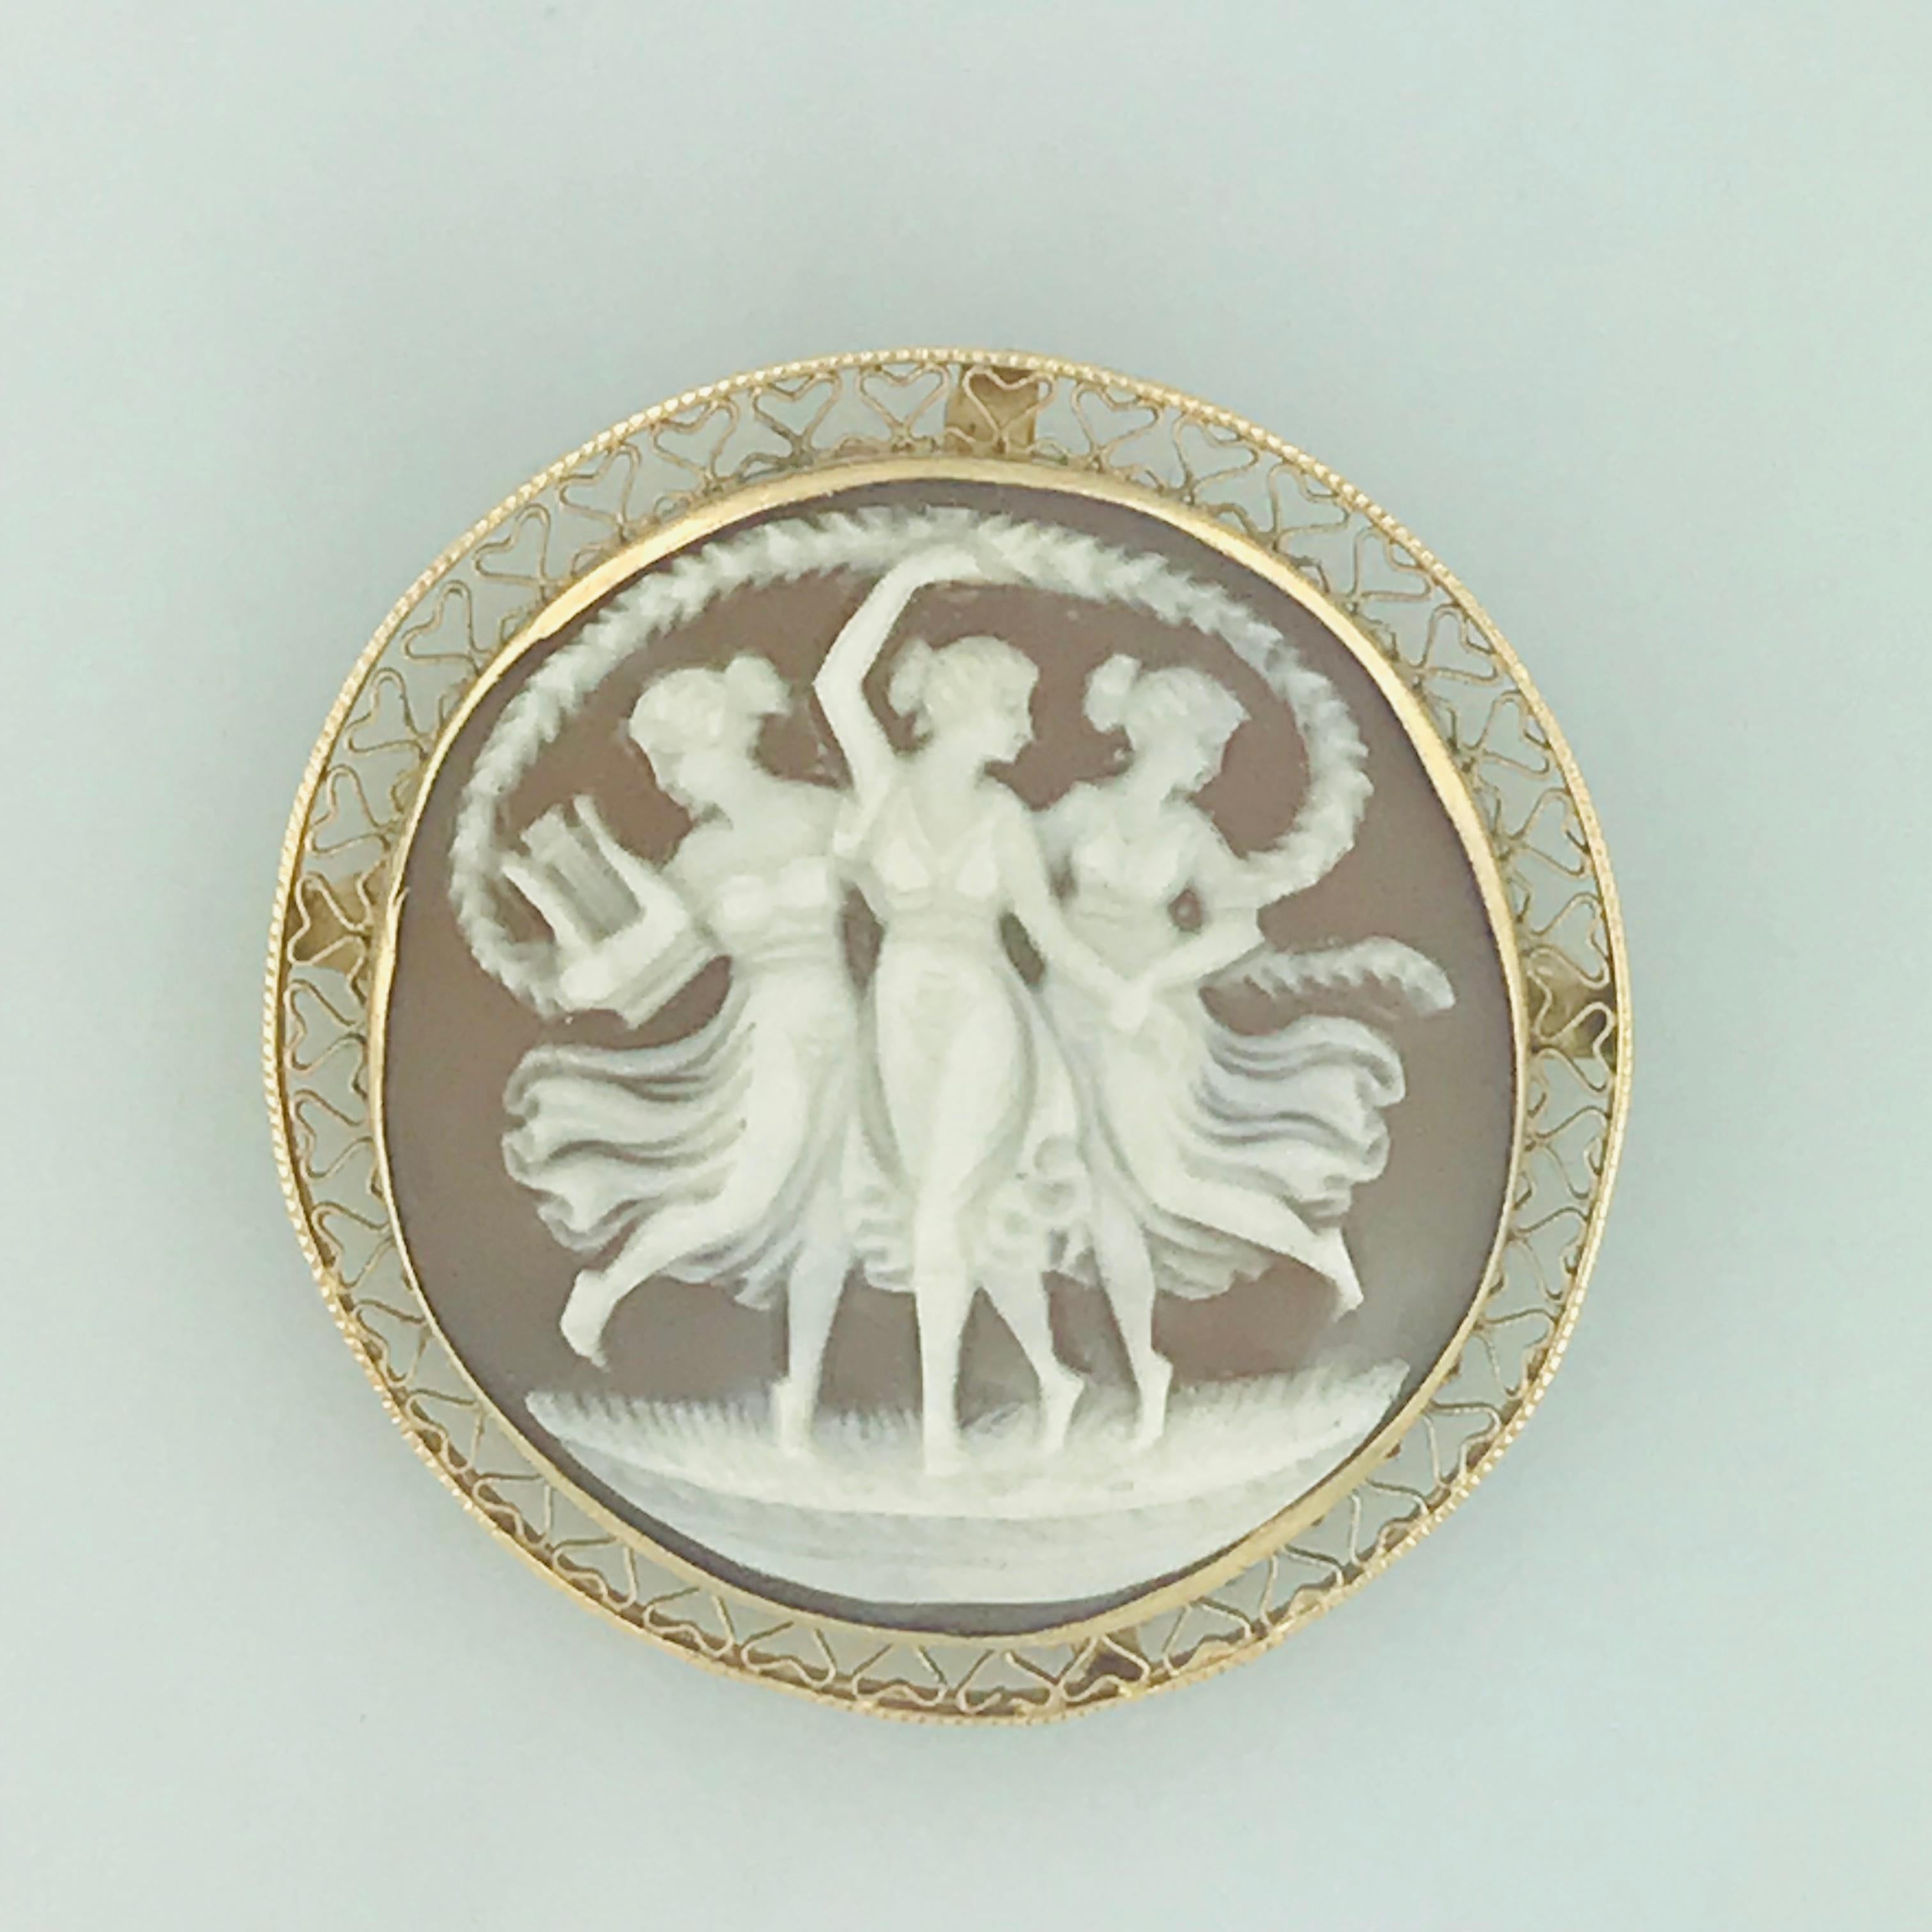 Vintage Cameo Brooch/Pin of Three Graces in 14 Karat Yellow Gold Filigree Frame 1